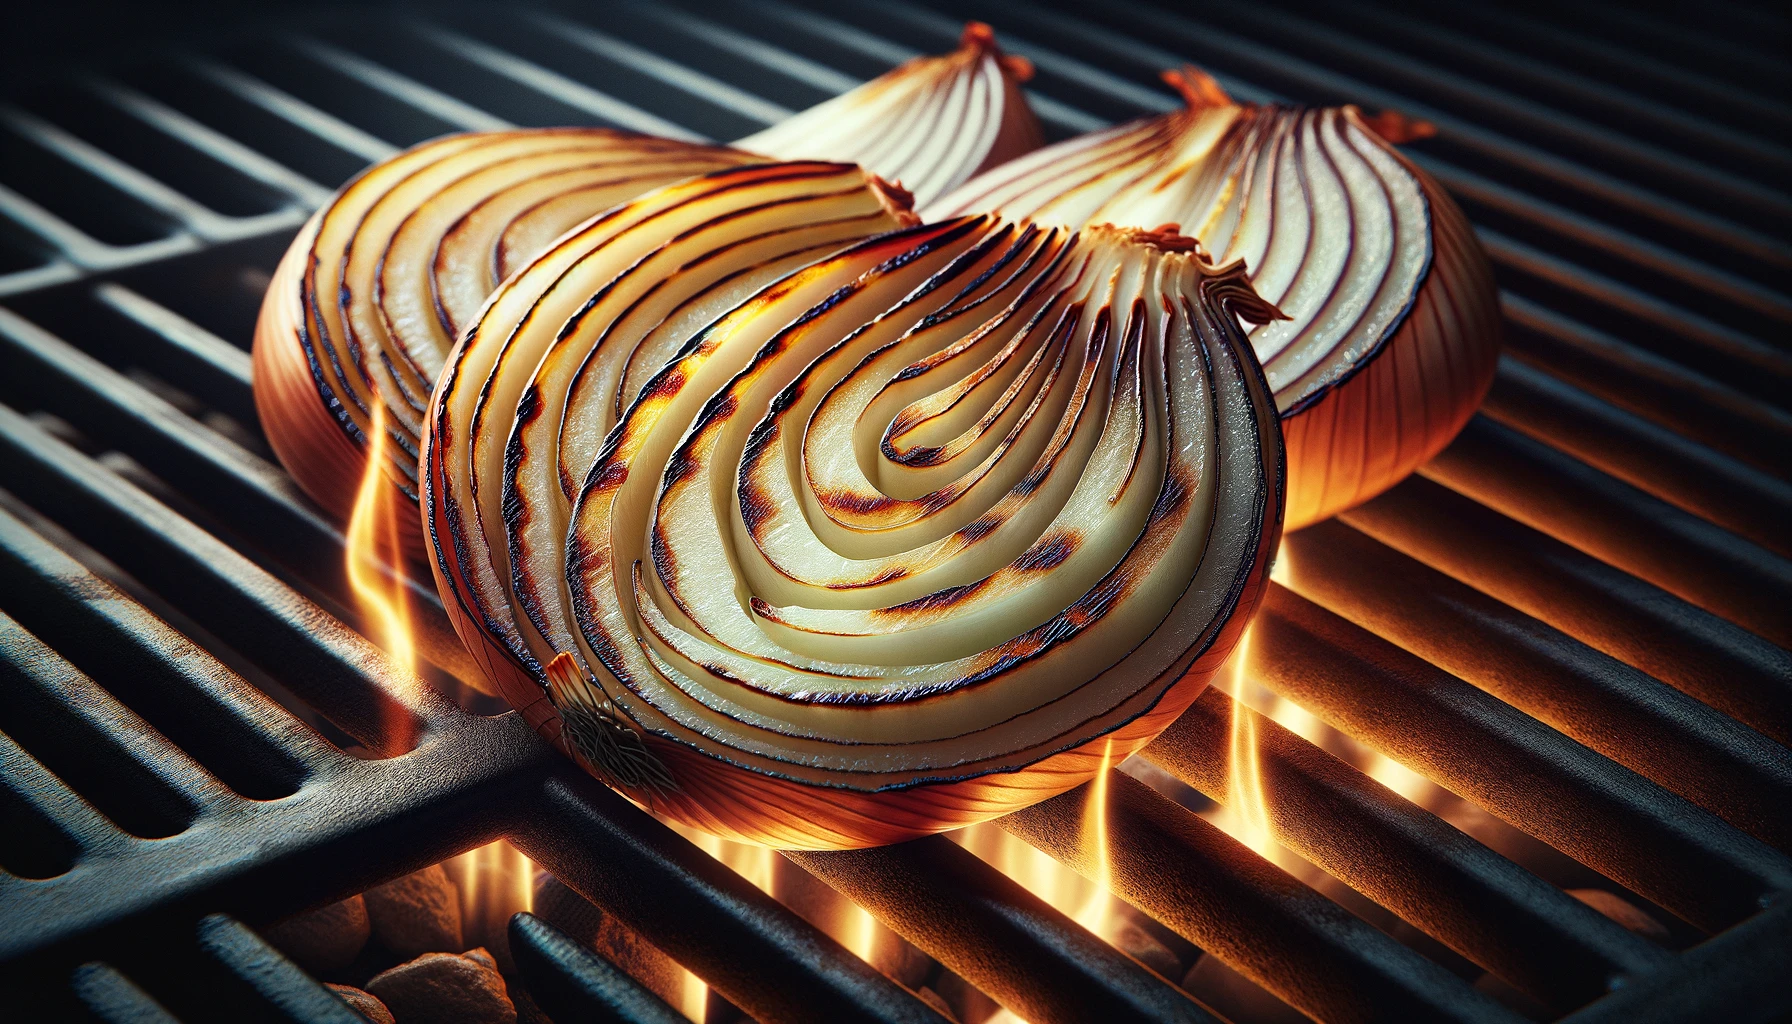 grilled onions